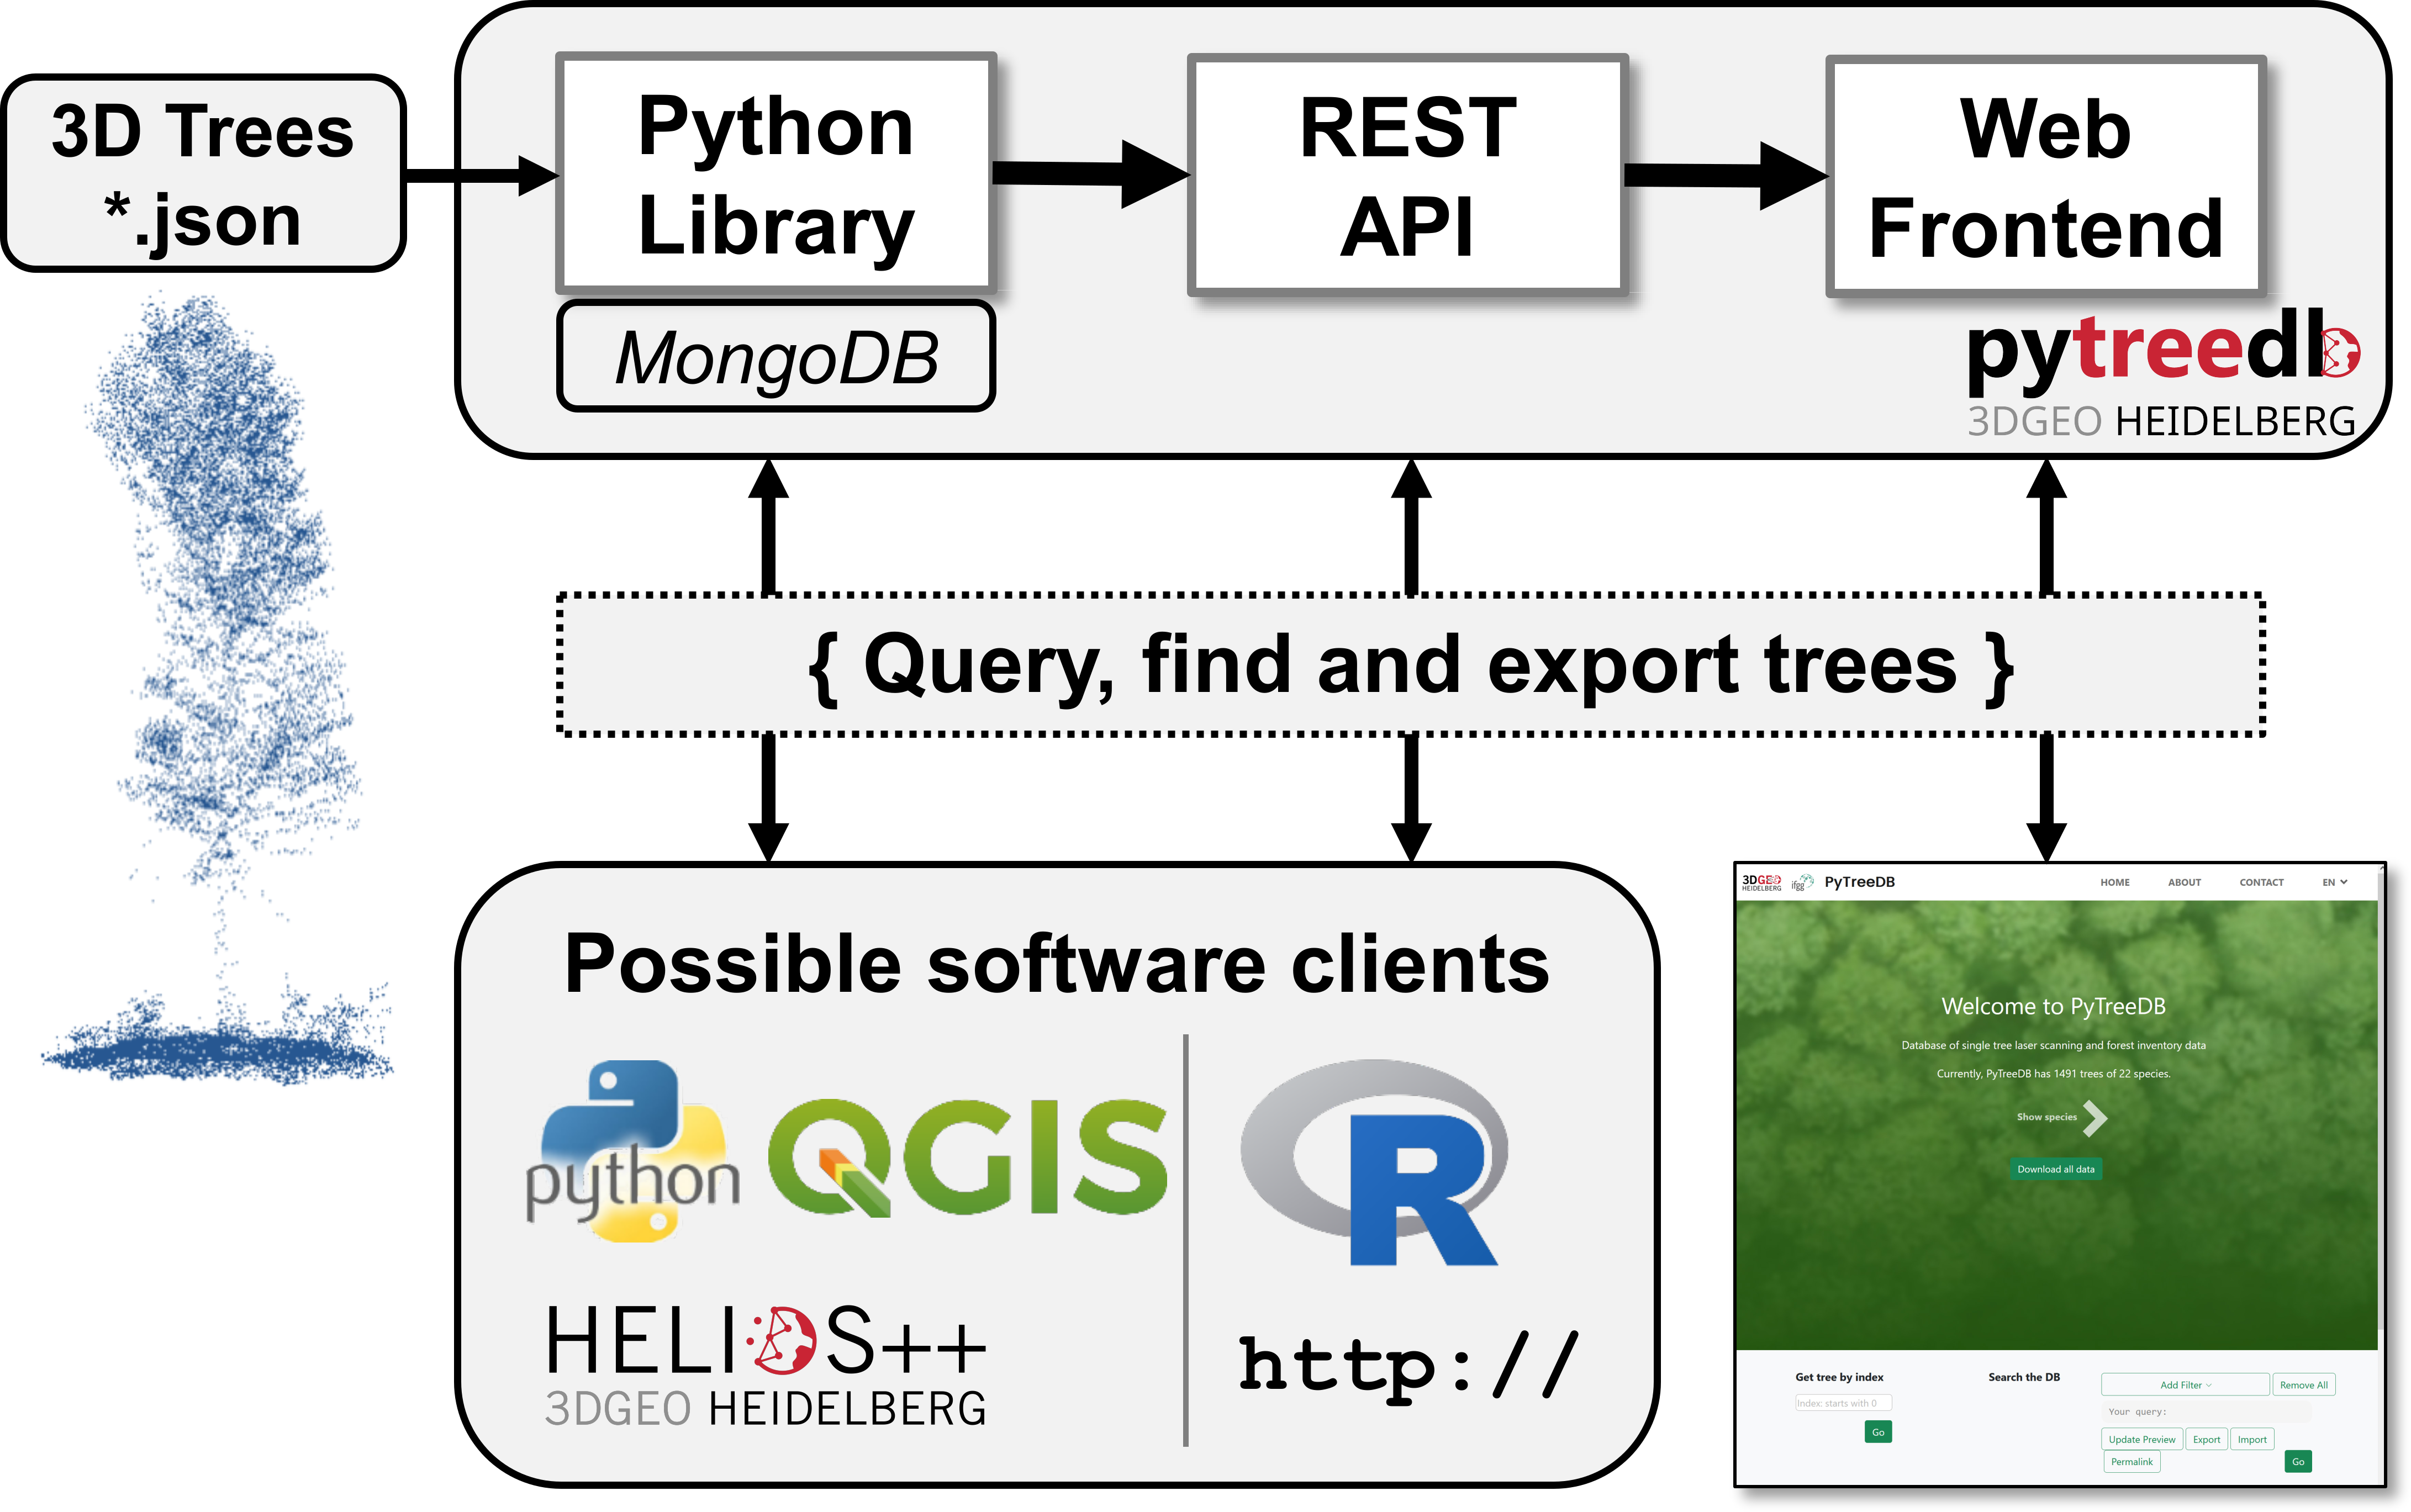 overview of the components of pytreedb